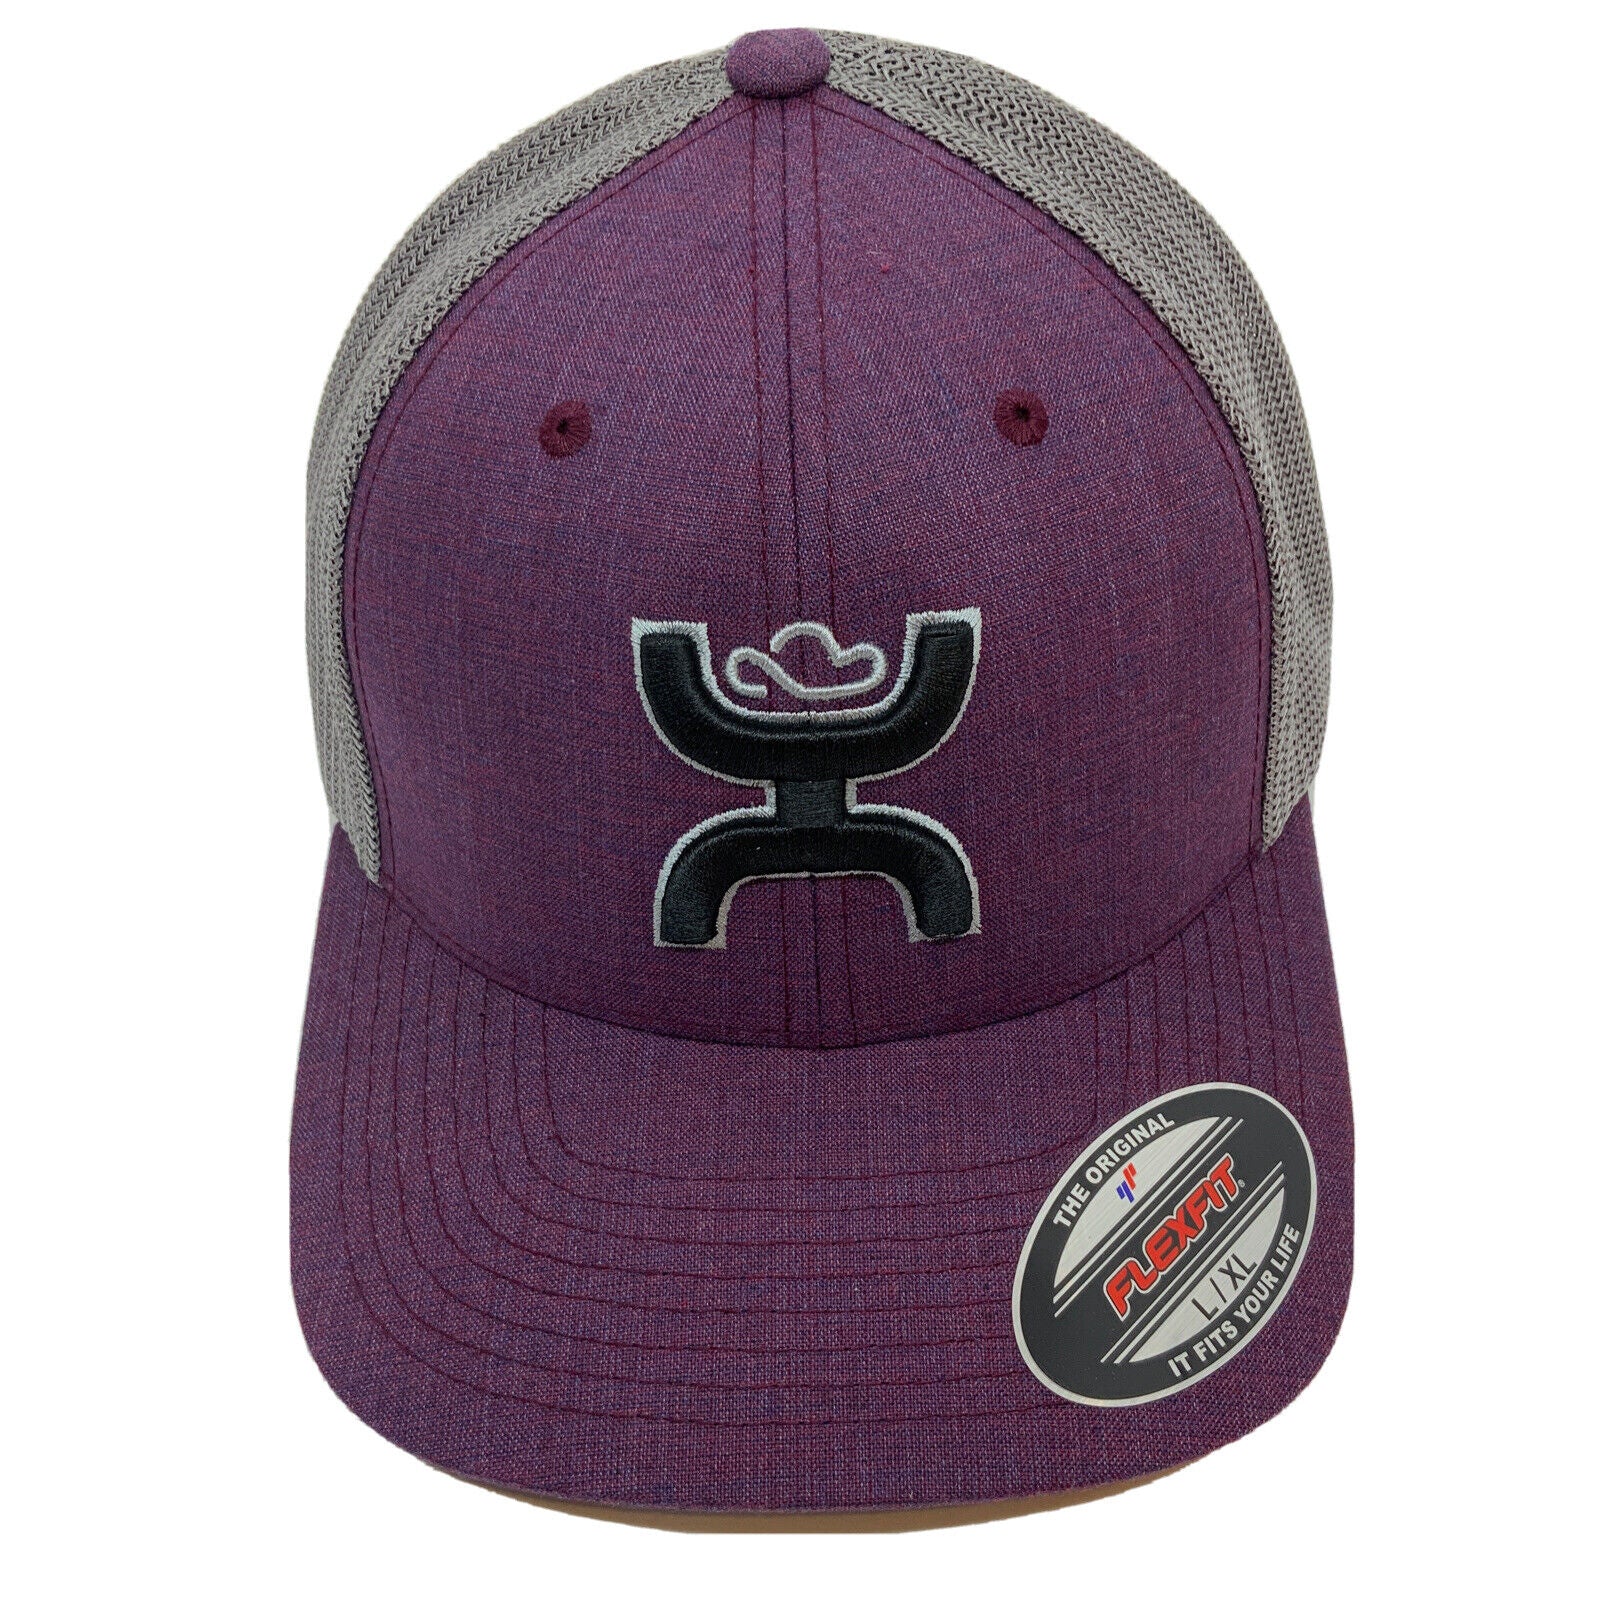 Hooey Baseball Hat Flexfit Cayman PLGY Mesh With 221102 Boutique | Southern Girls Purple Gray